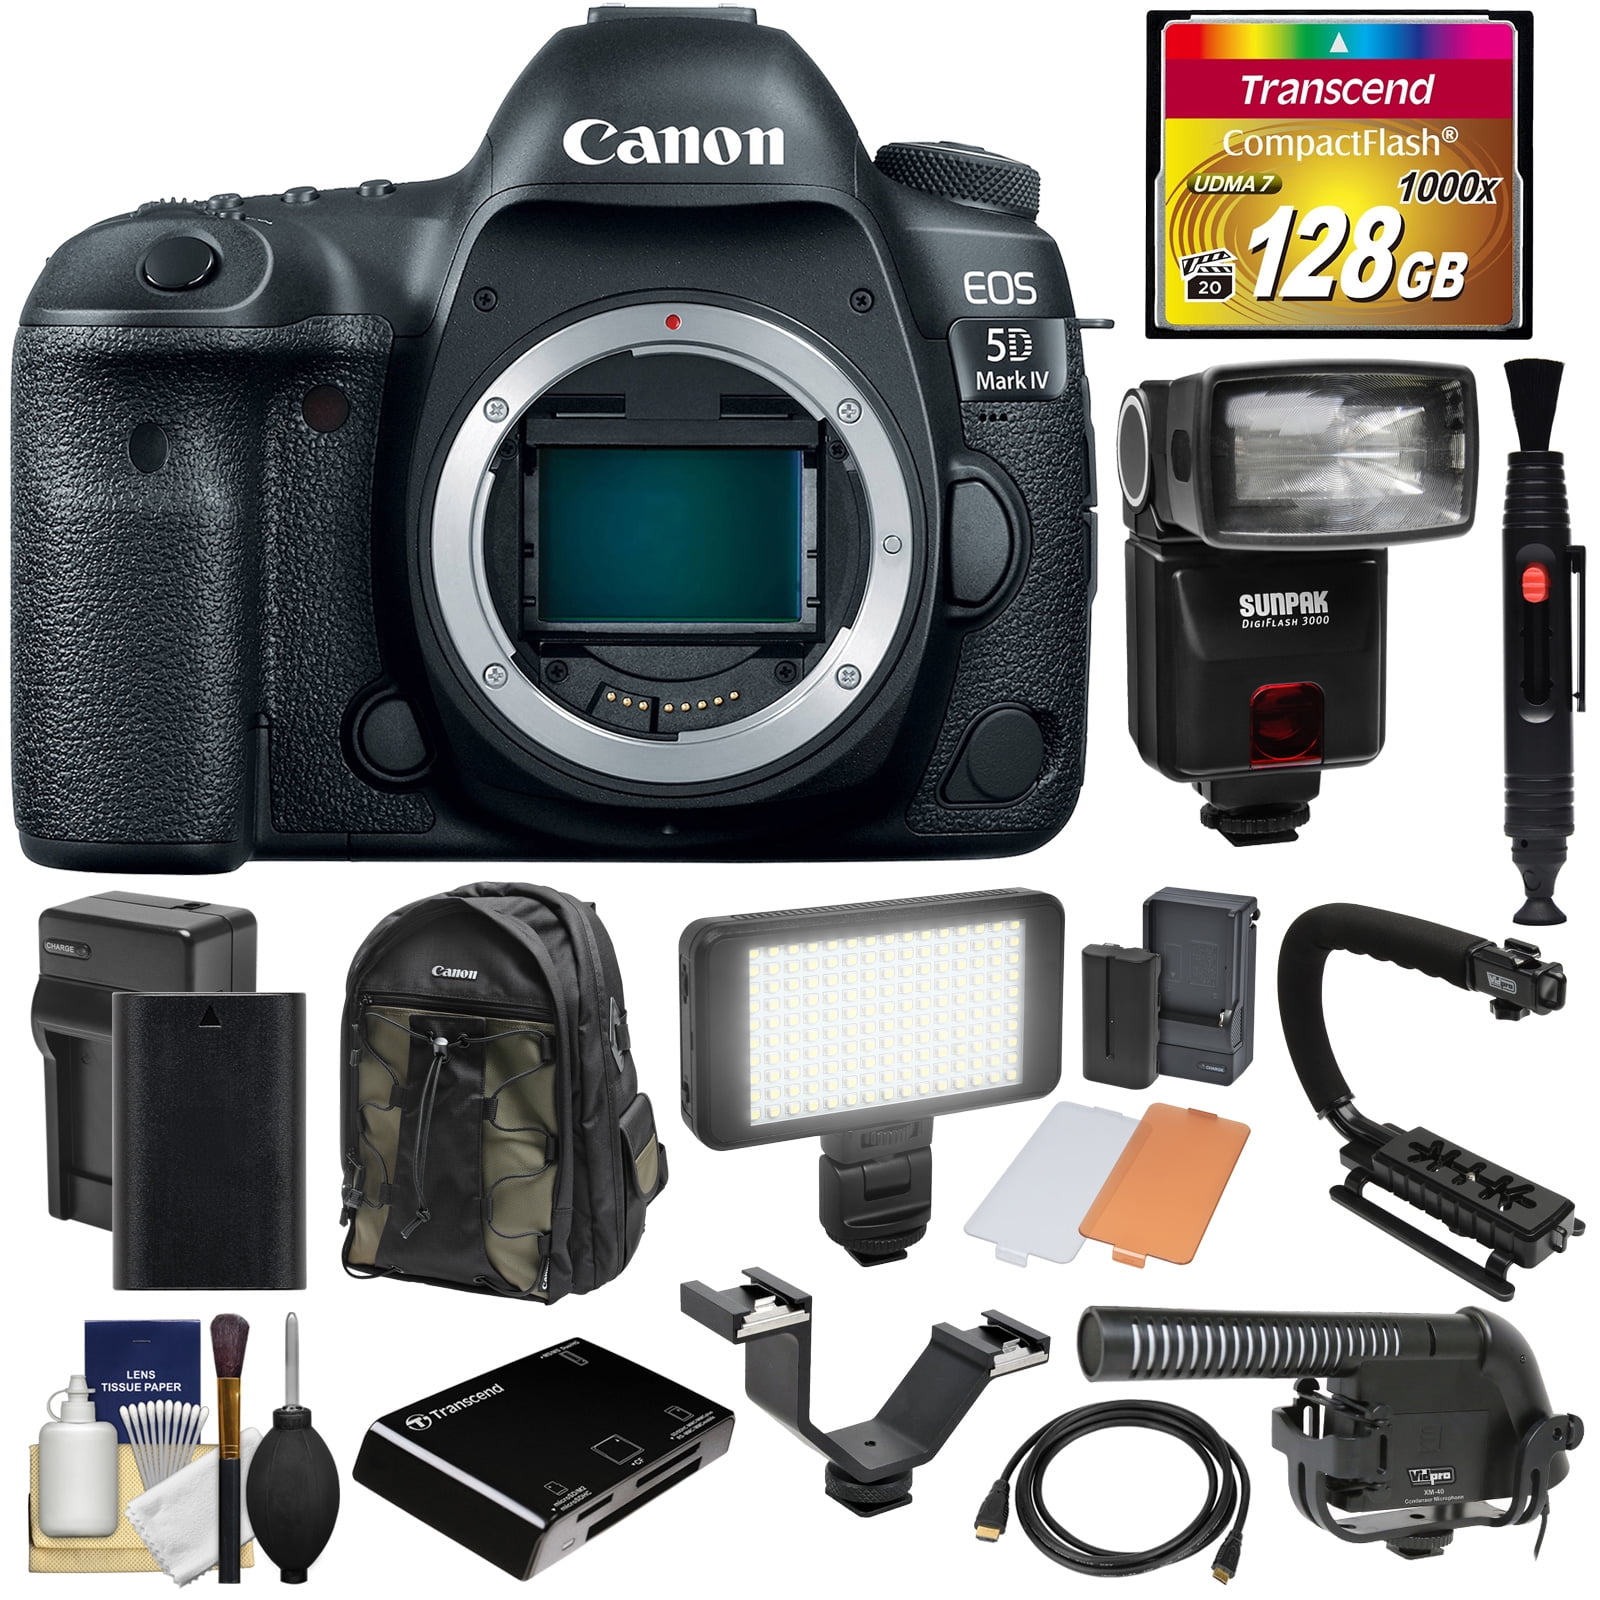 Canon EOS 5D Mark IV 4K Wi-Fi Digital SLR Camera Body with 128GB CF Card + Battery & Charger + Backpack + Flash + LED Video Light + + Kit - Walmart.com